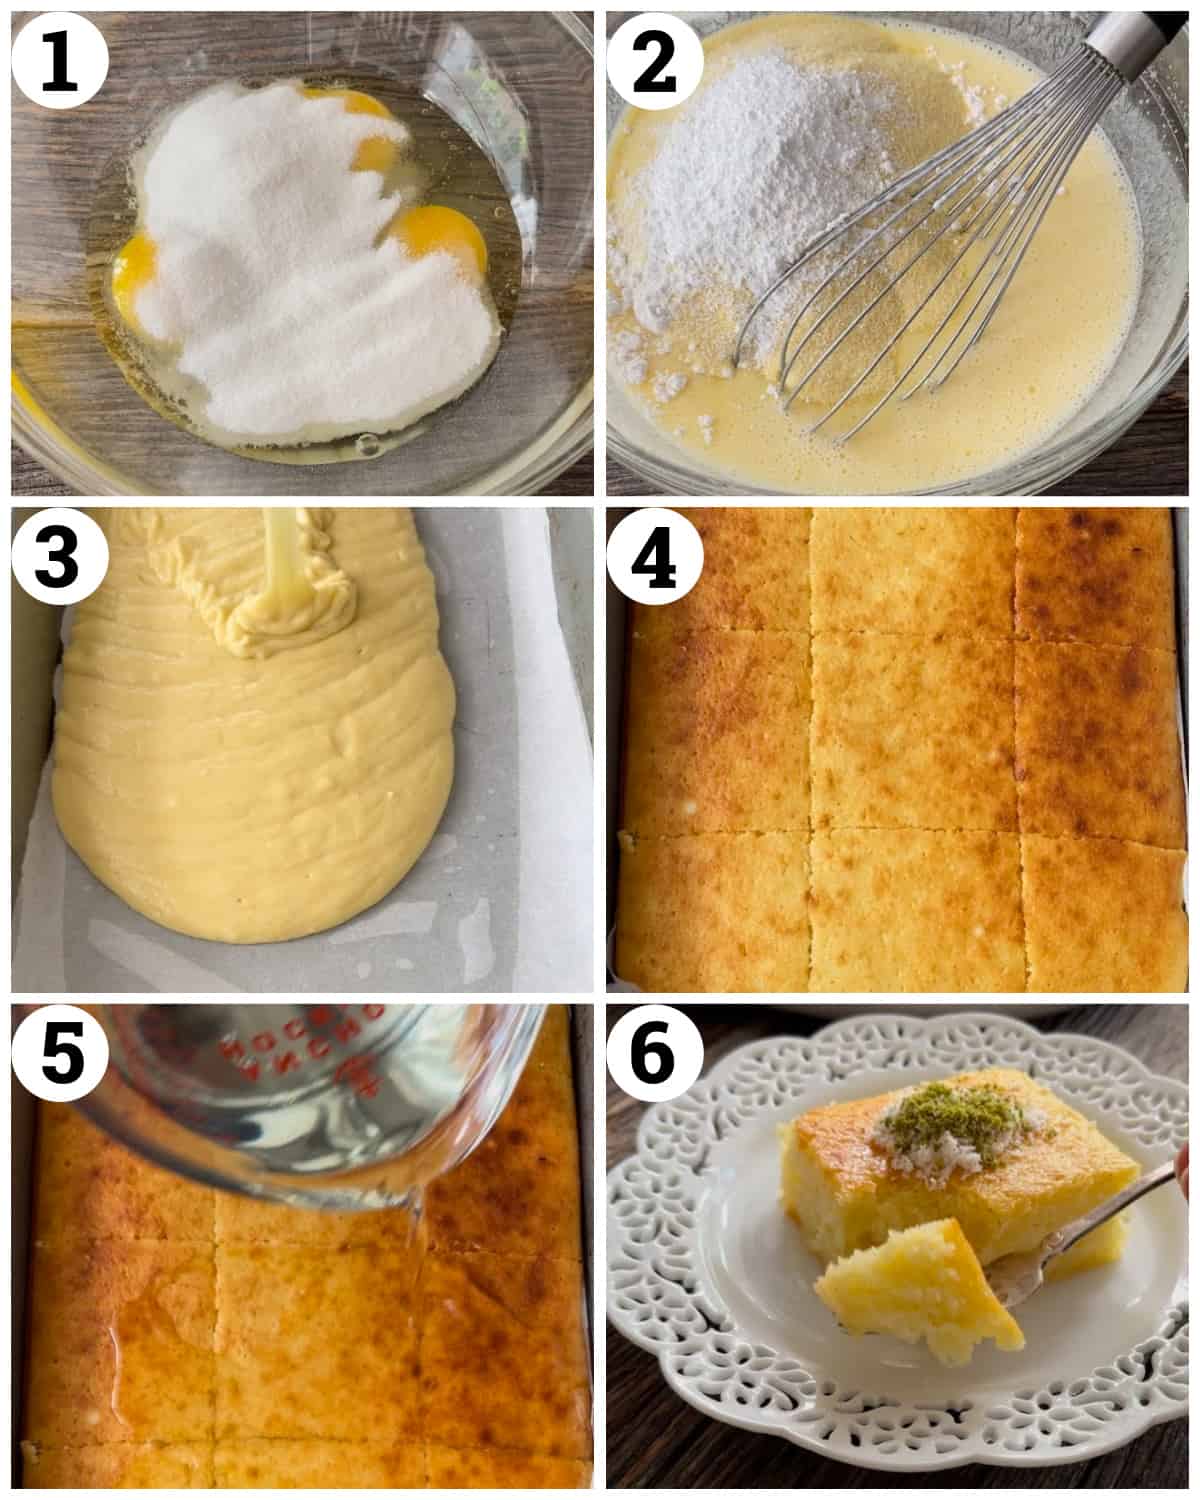 mix the eggs with sugar and oil then add the dry ingredients. Bake in the oven and pour the syrup on the cake. 